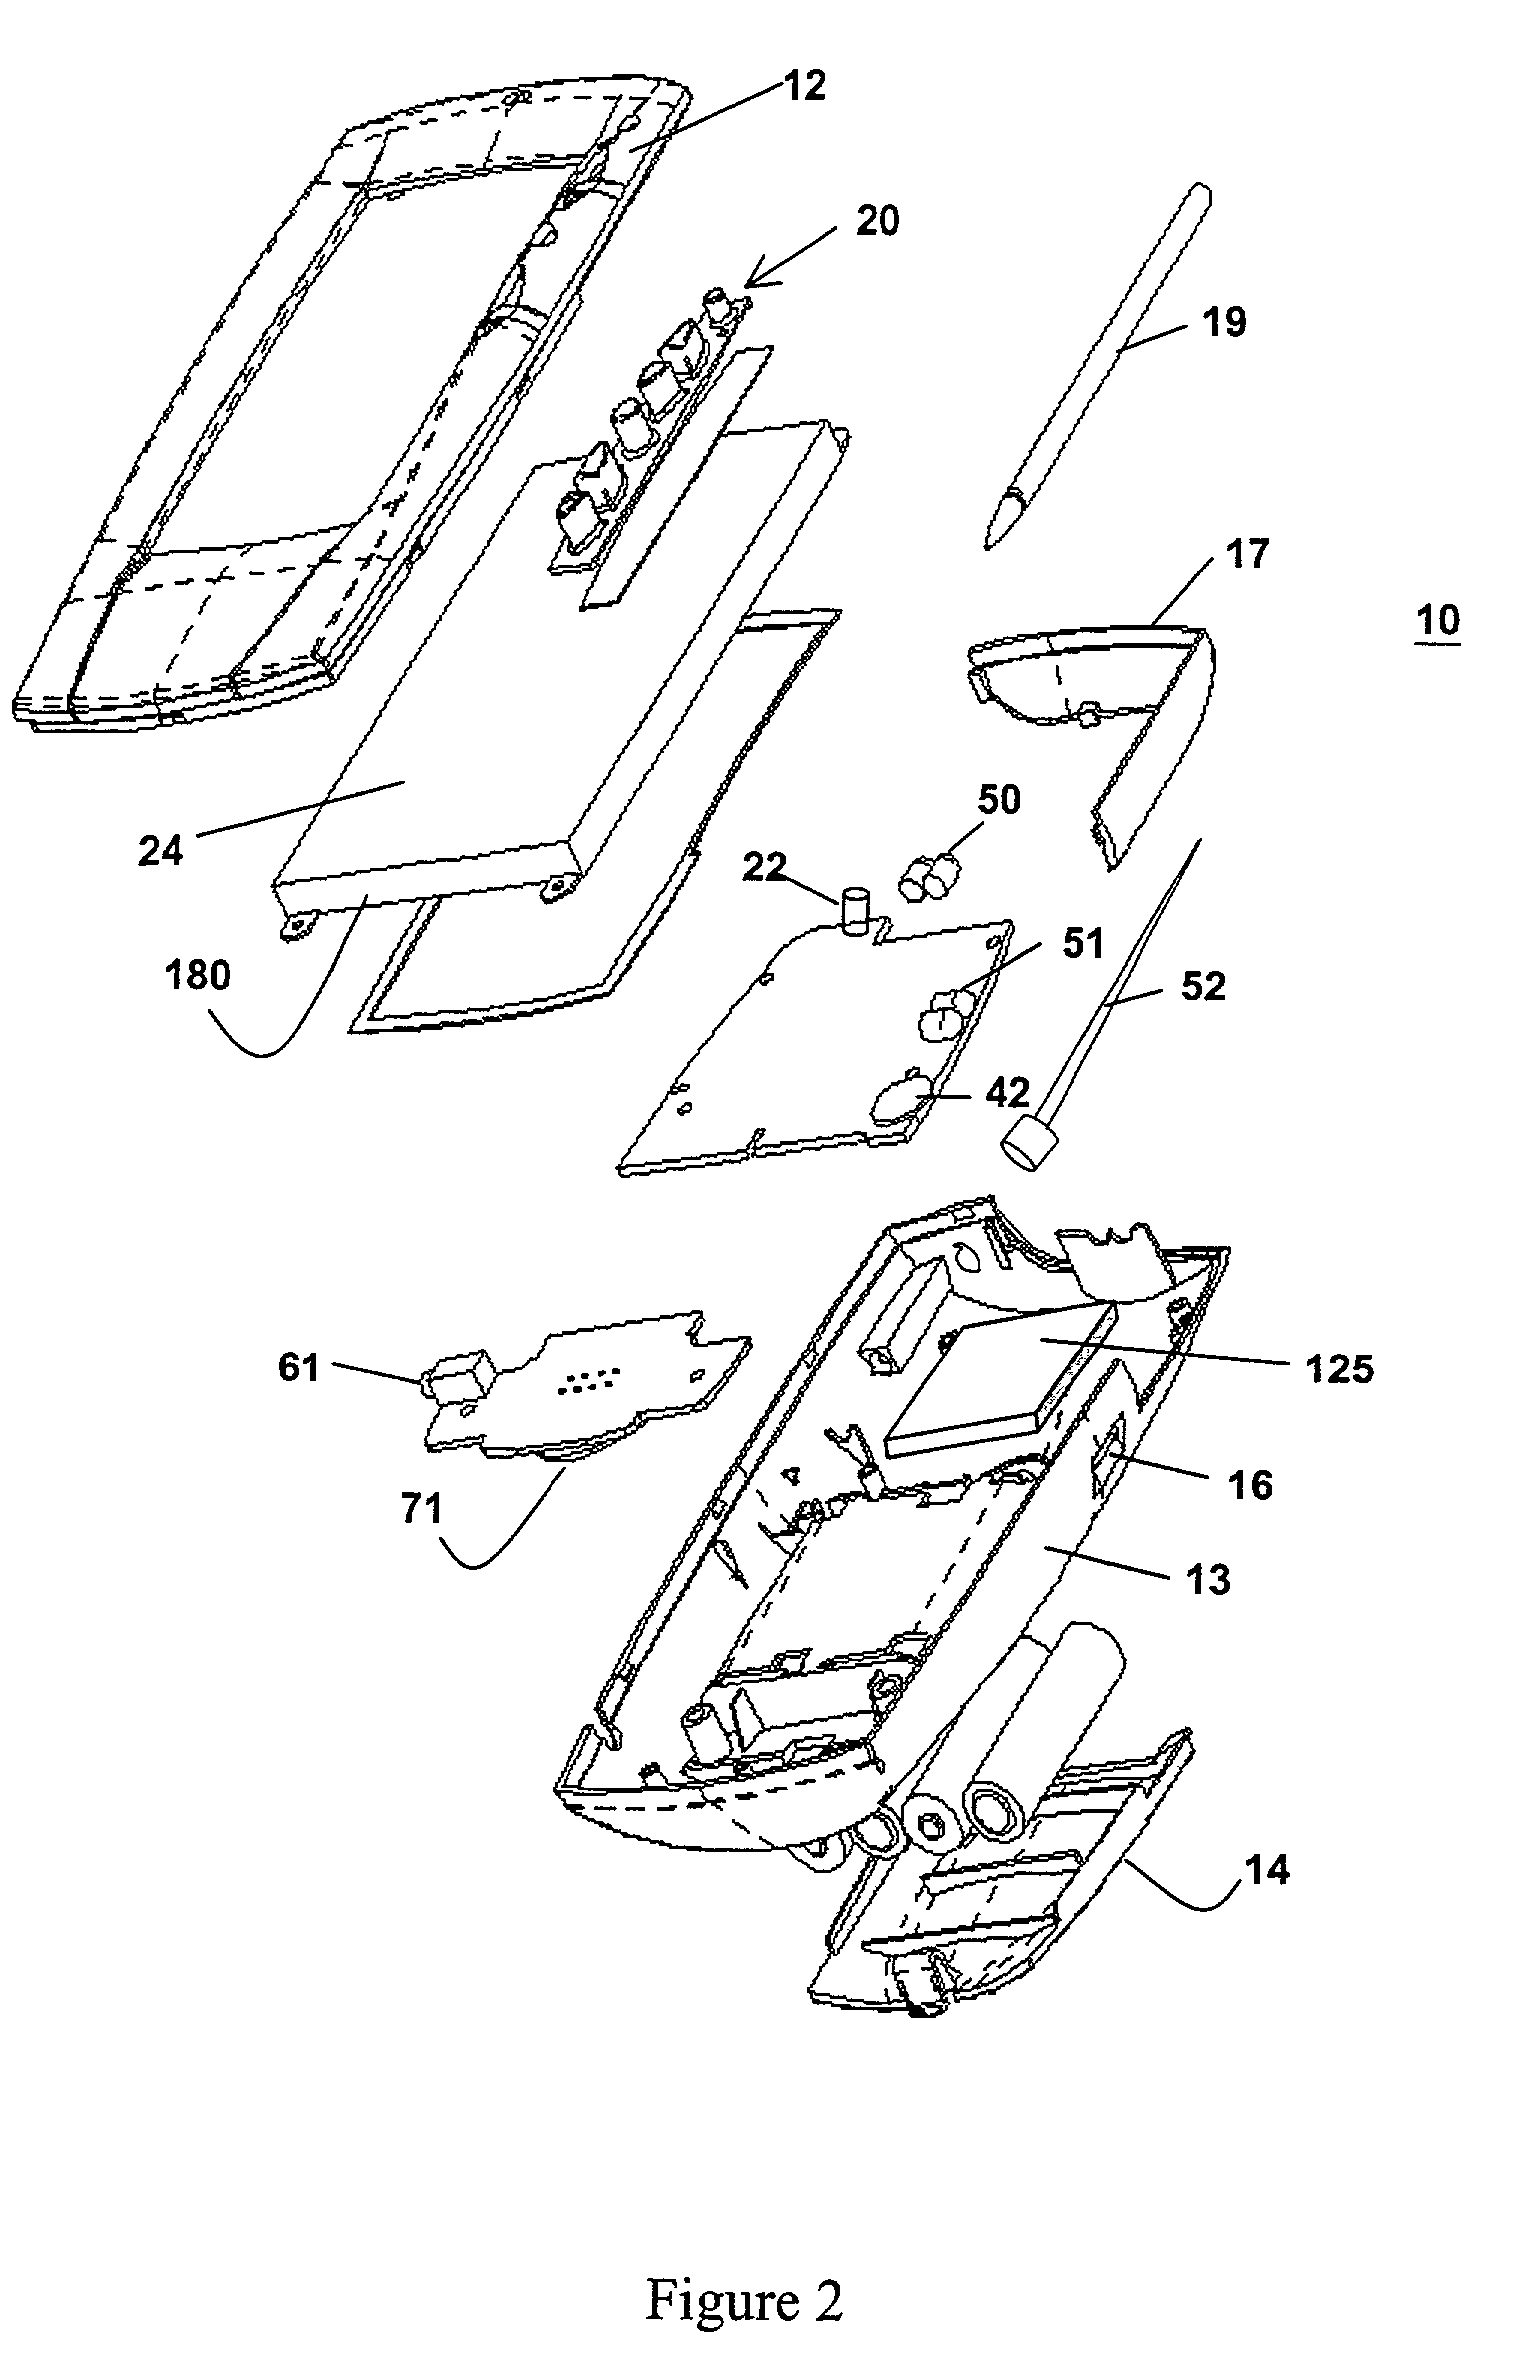 System and method for using a hand held device to display a readable representation of an audio track